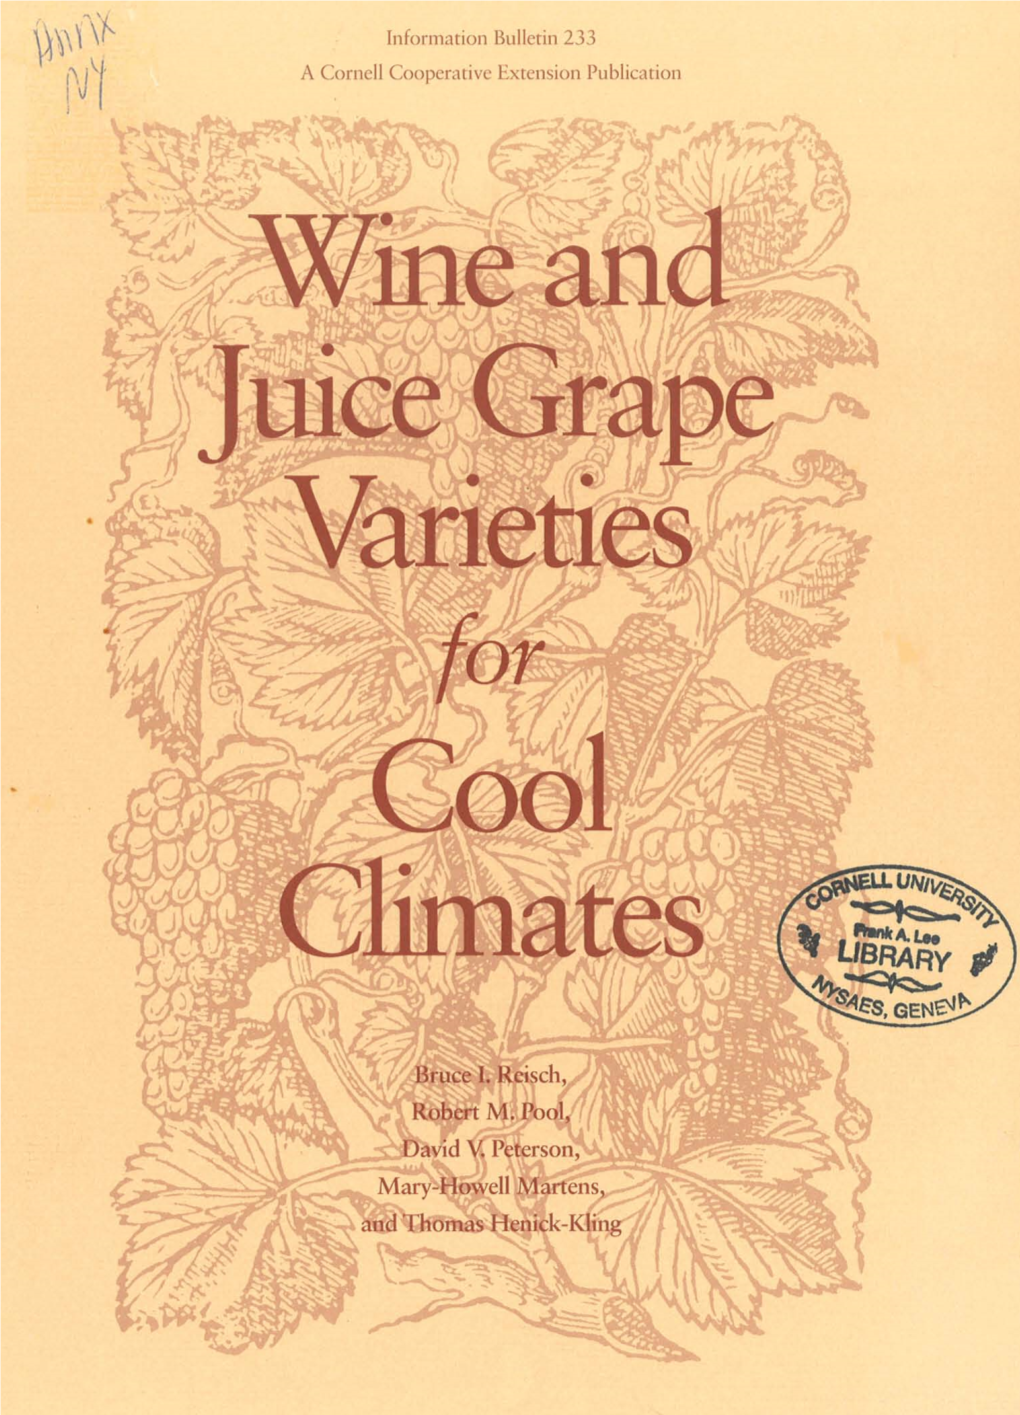 Wine and Juice Grape Varieties for Cool Climates